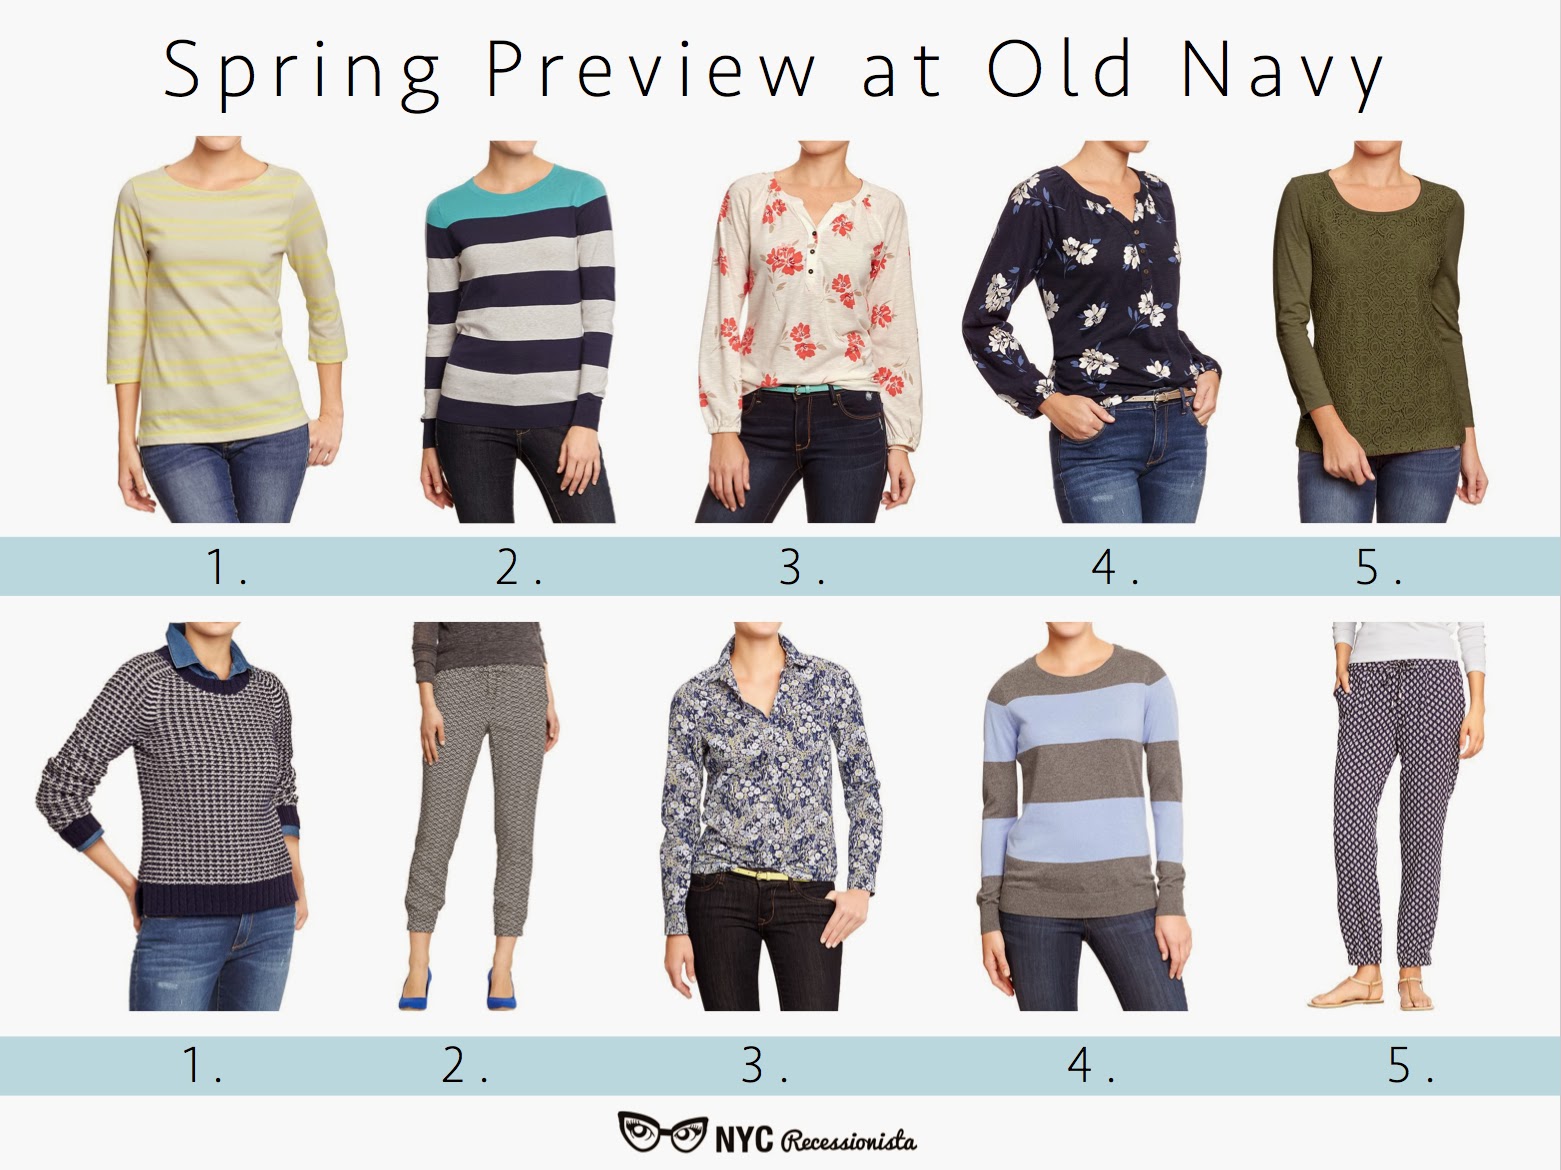 New Arrivals Week: Spring Preview at Old Navy - NYC Recessionista